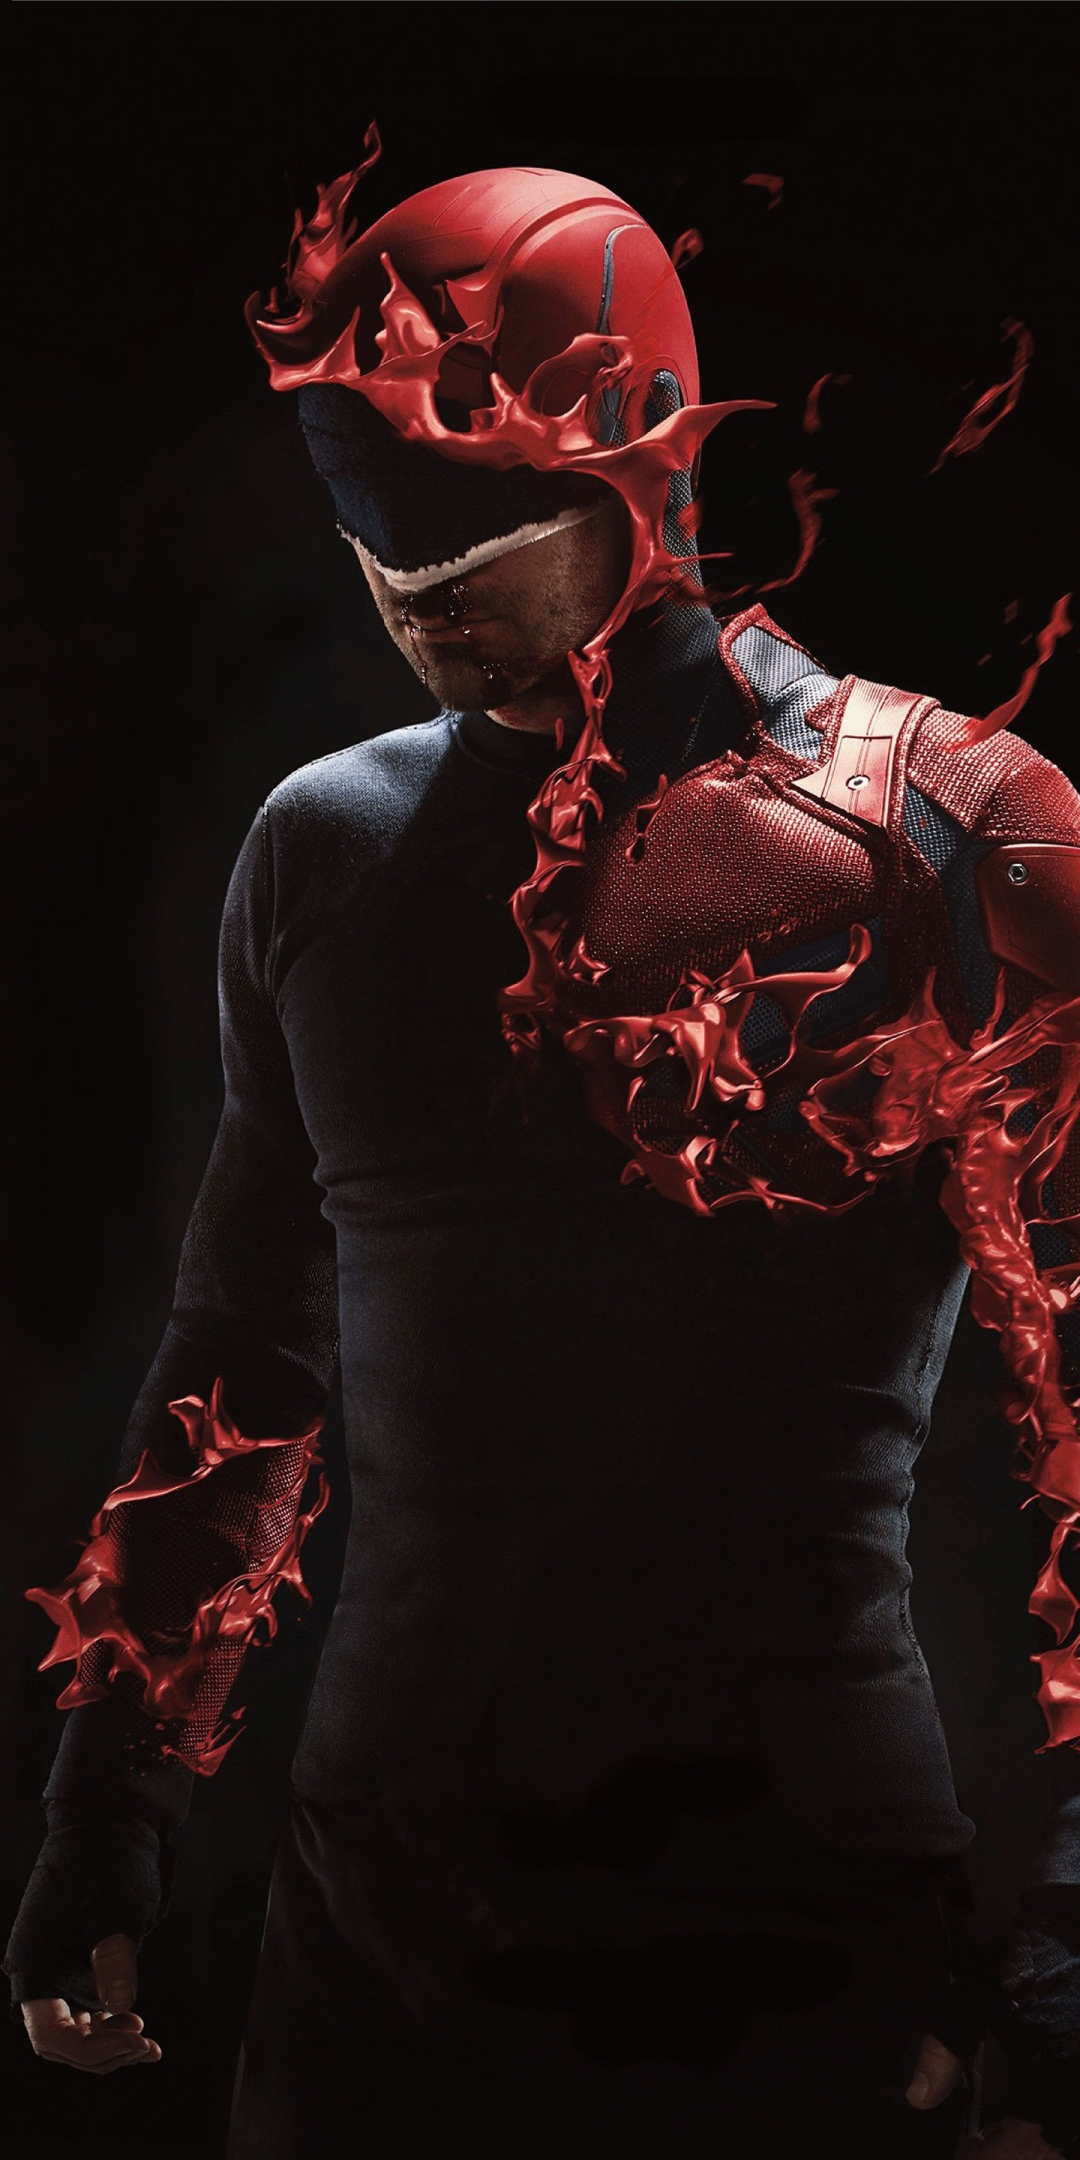 Download daredevil, tv show, 2019 1080x2160 wallpaper, honor 7x, honor 9 lite, honor view 1080x2160 HD image, background, 19223